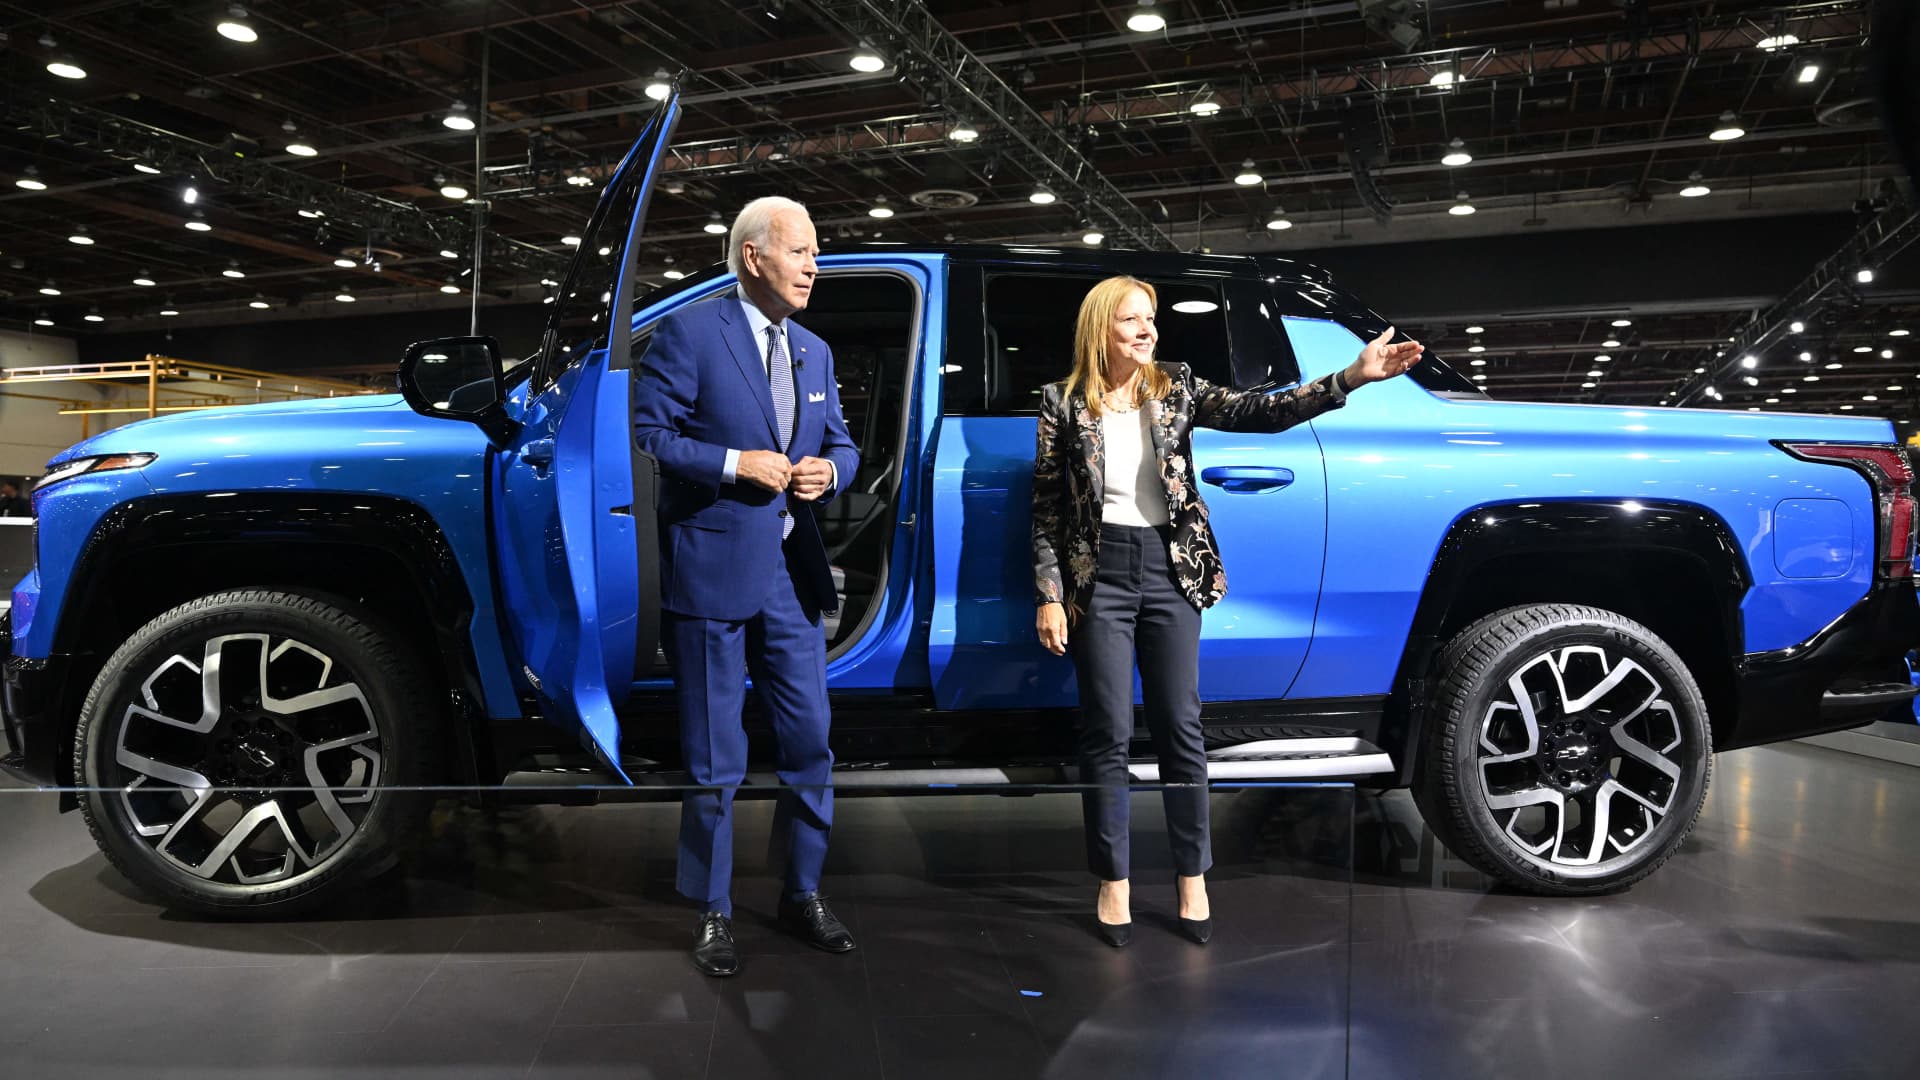 US President Joe Biden, with General Motors CEO Mary Barra, looks at a Chevrolet Silverado EV as he tours the 2022 North American International Auto Show at Huntington Place Convention Center in Detroit, Michigan on September 14, 2022. - Biden is visiting the auto show to highlight electric vehicle manufacturing.